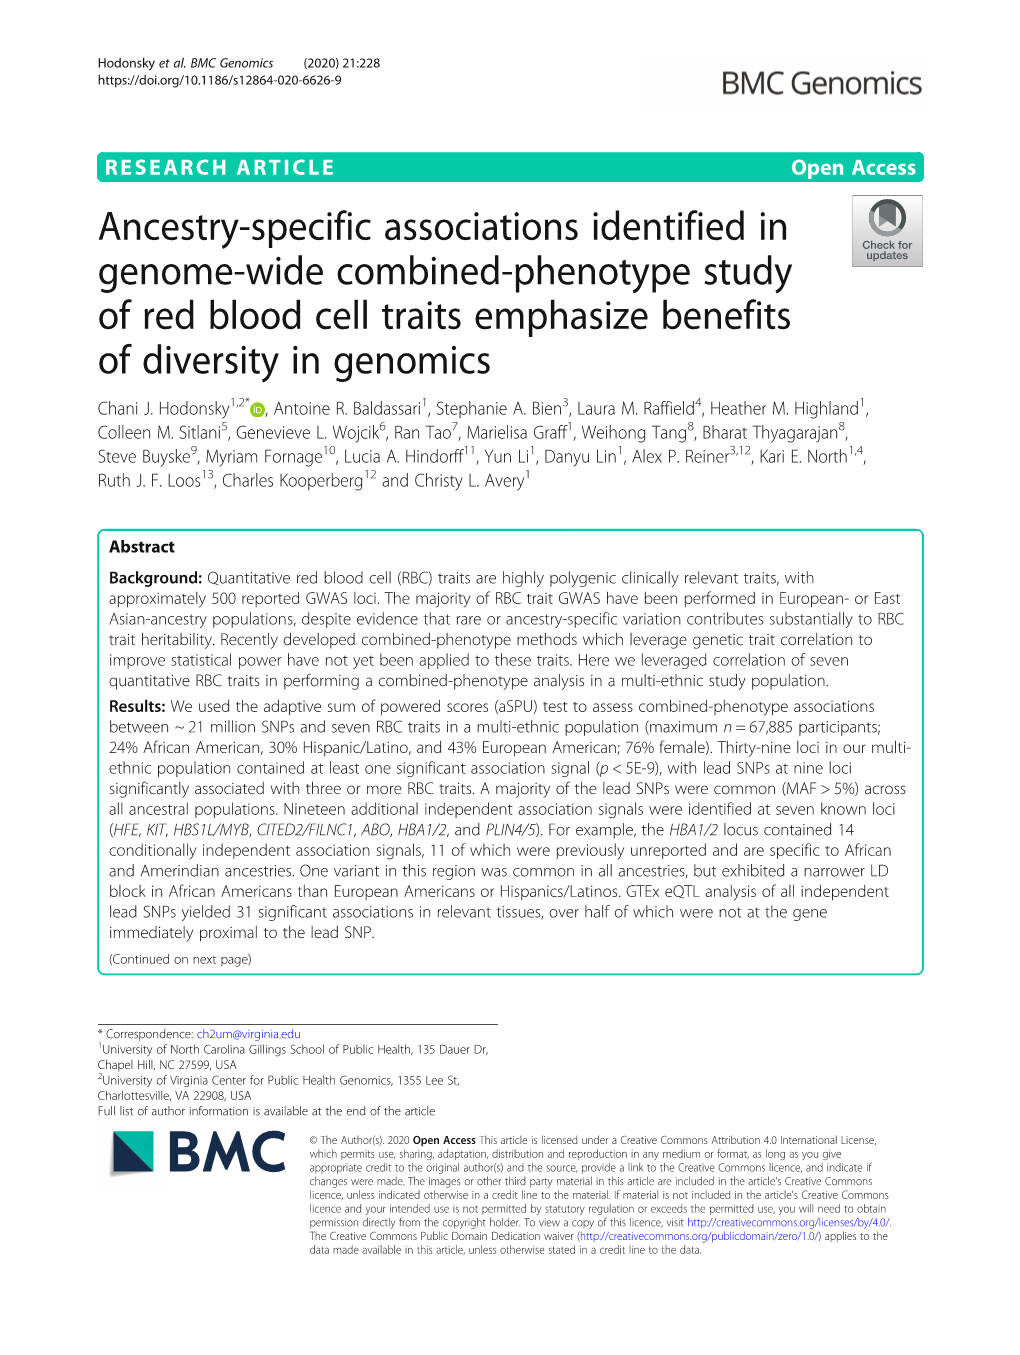 Ancestry-Specific Associations Identified in Genome-Wide Combined-Phenotype Study of Red Blood Cell Traits Emphasize Benefits of Diversity in Genomics Chani J